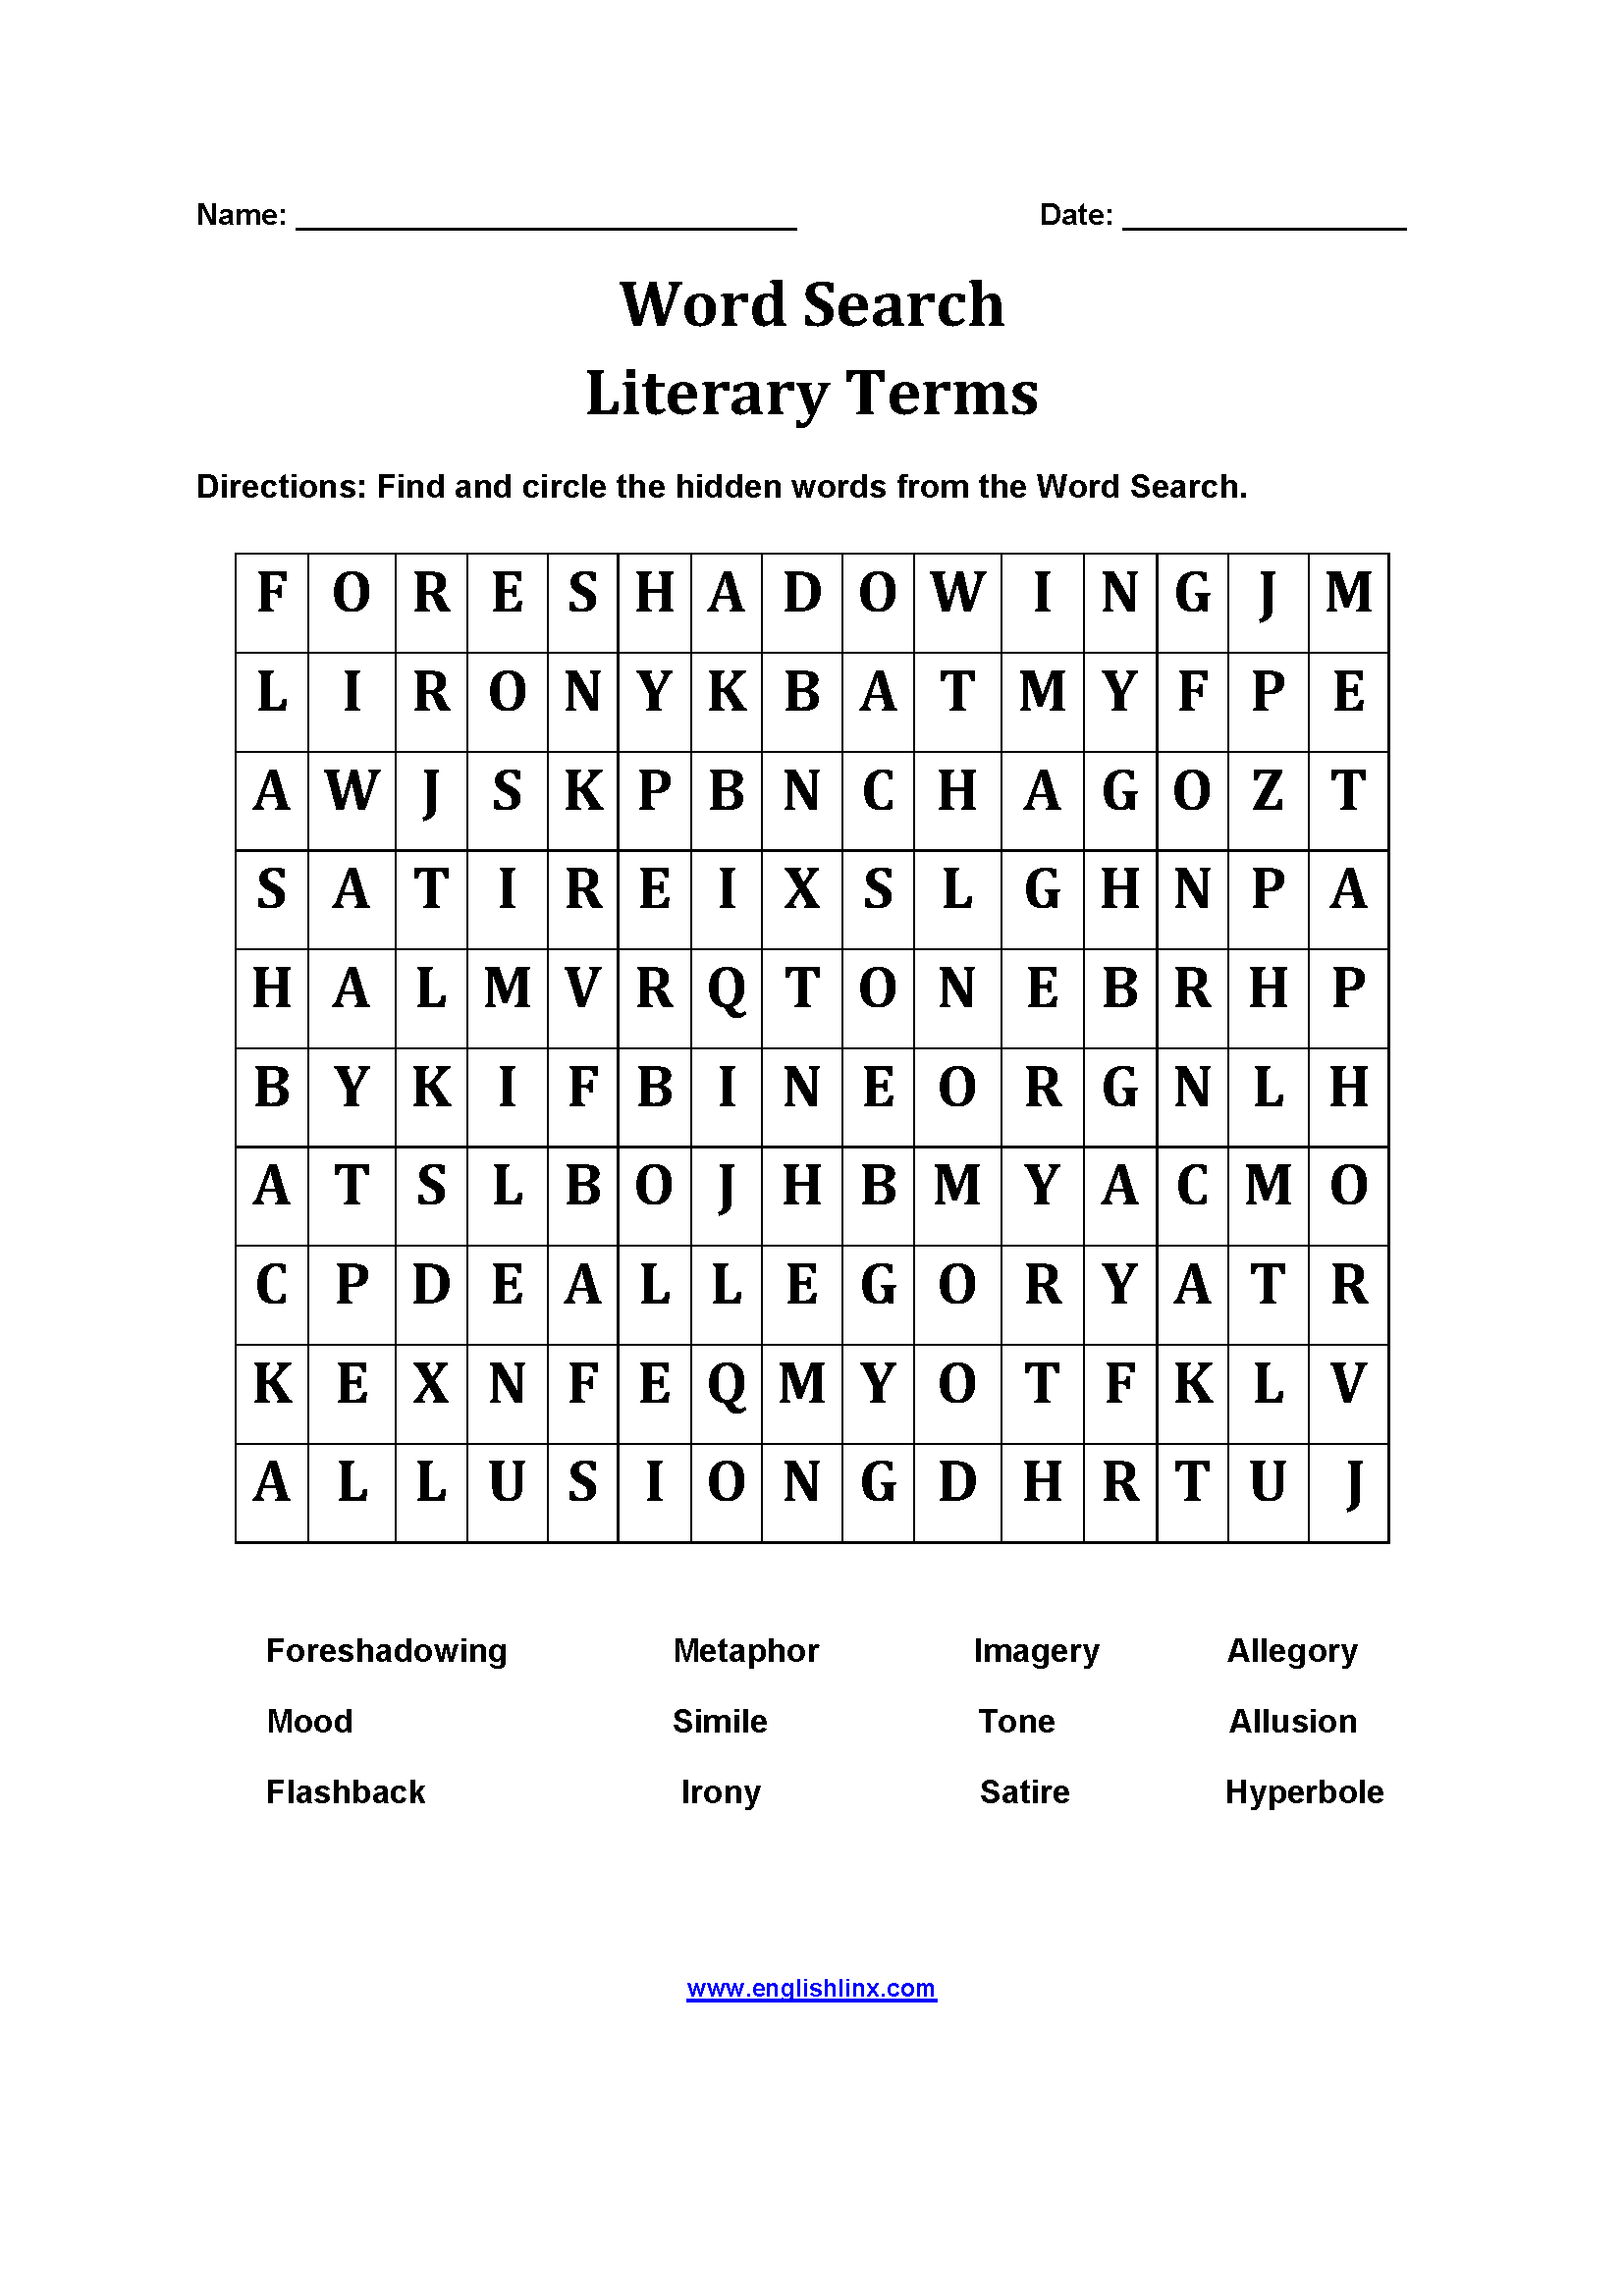 Literary Terms Word Search Worksheets